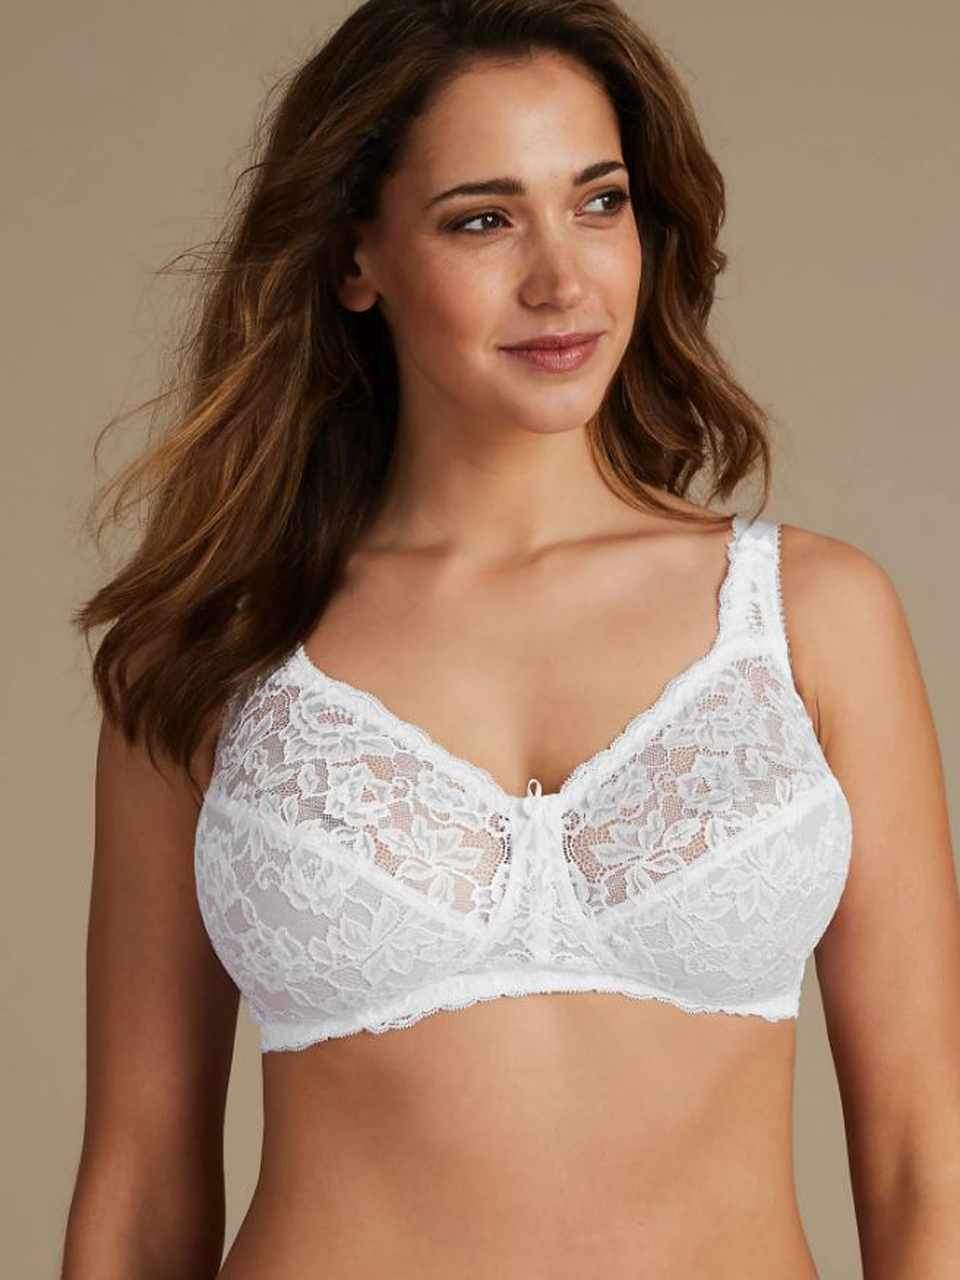 M&S Total Support N/W Full Cup Bra T33/8094A – Enem Store - Online